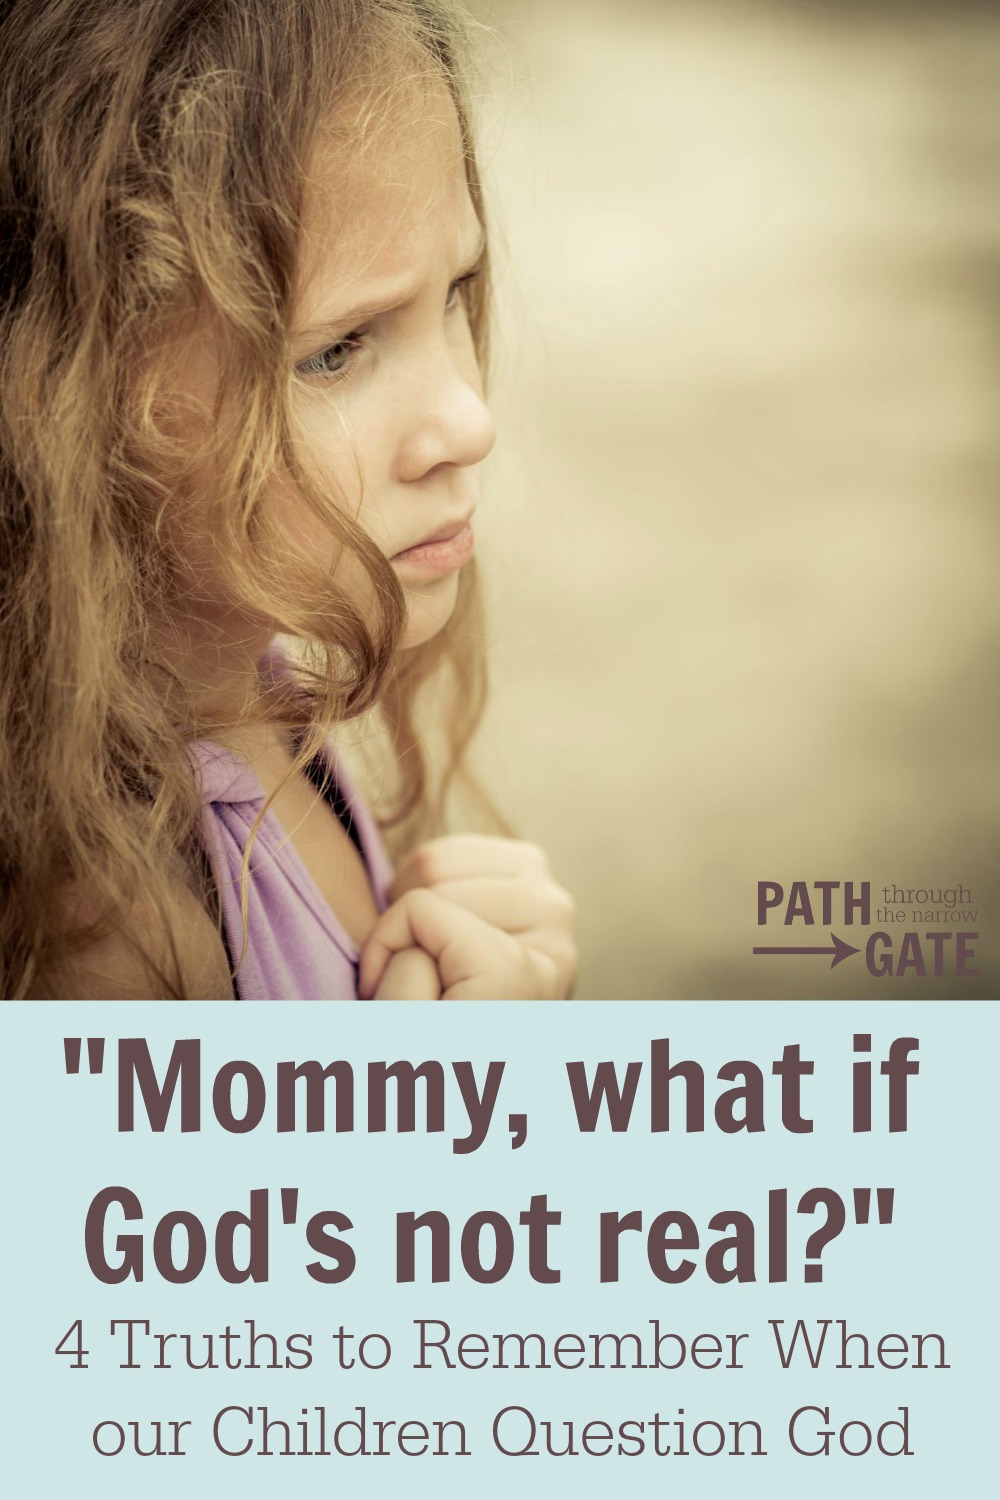 Have your children ever questioned God? It can be a terrifying experience for parents. This post offers real help.|Path Through the Narrow Gate.com